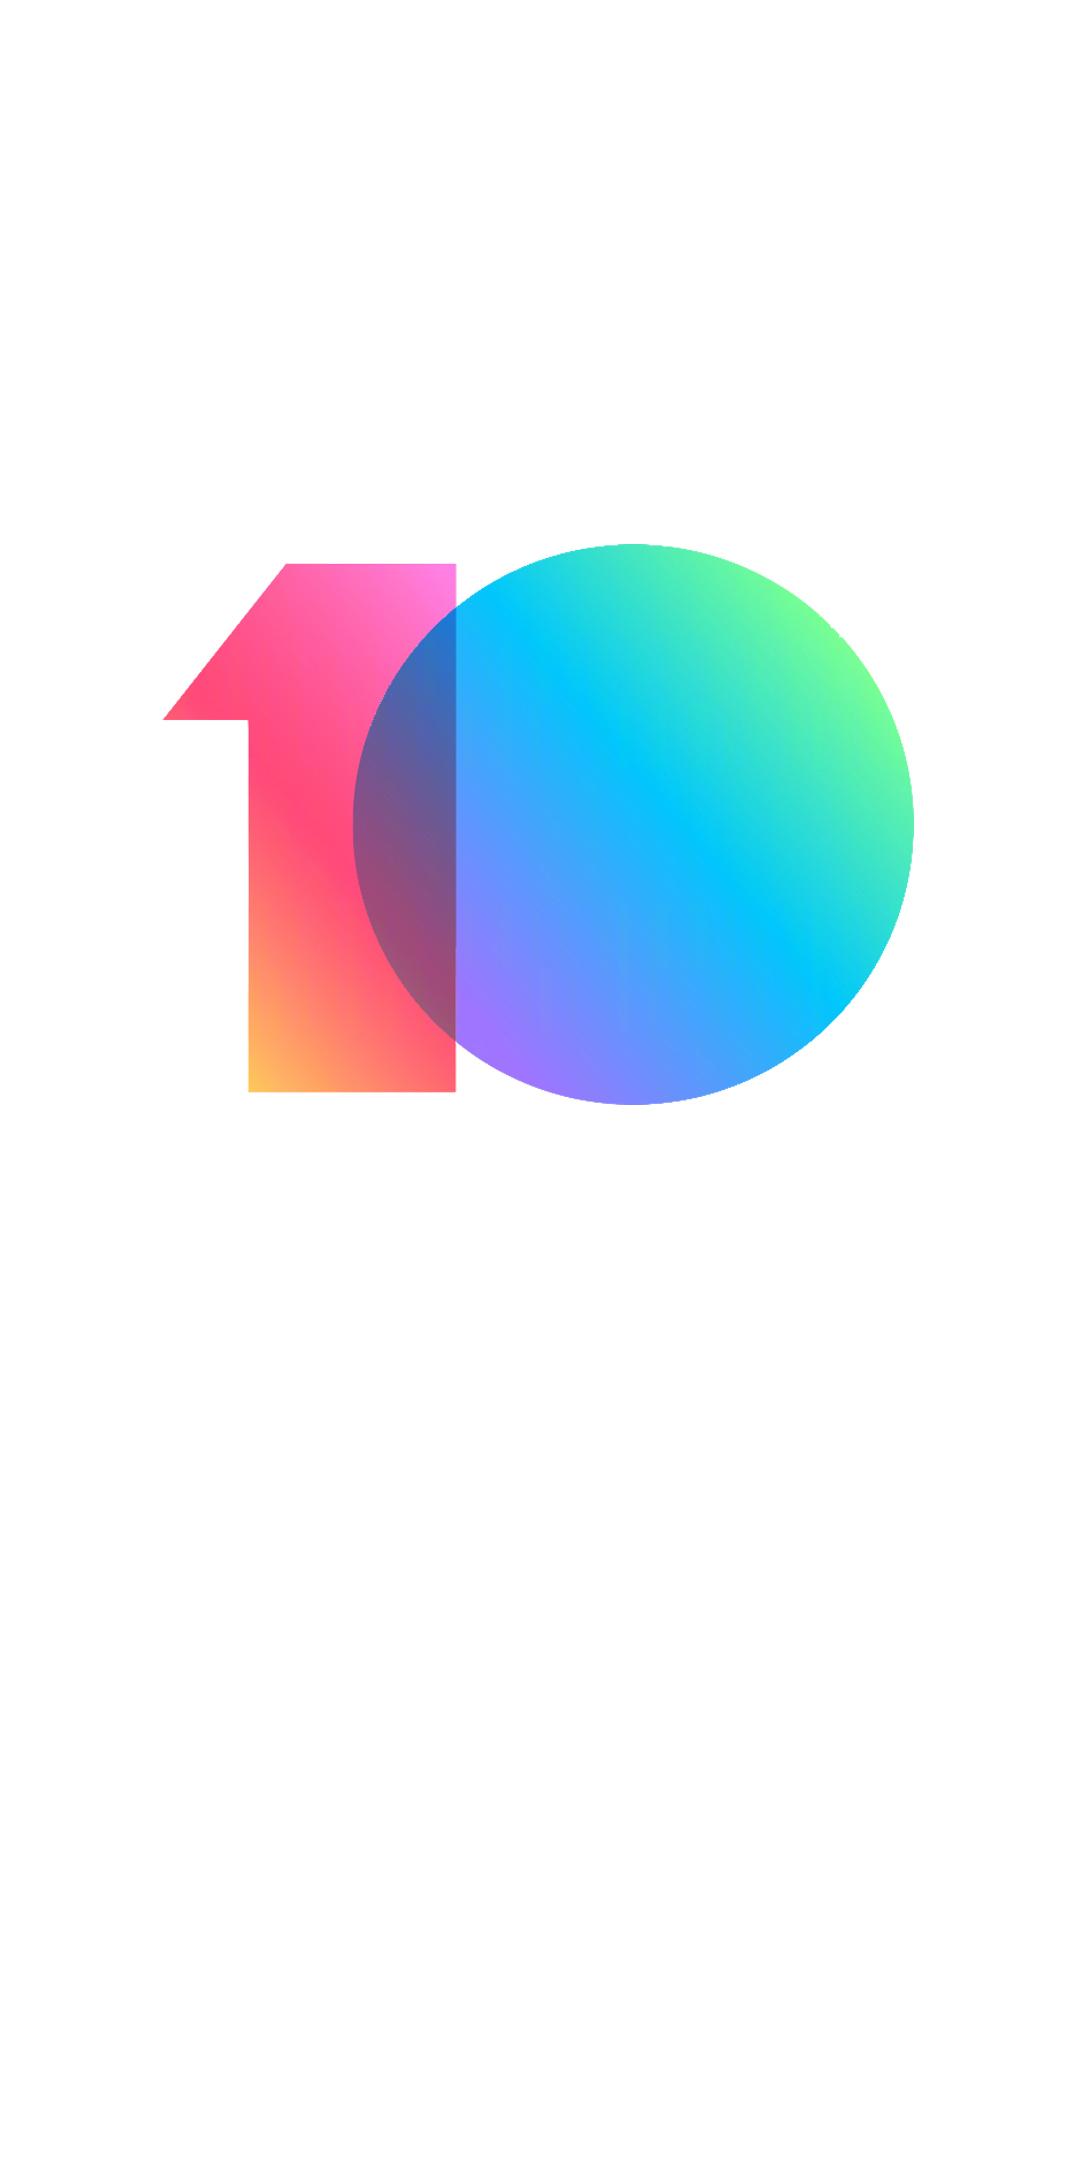 Download MIUI 10 Stock Wallpaper [Complete Collection]